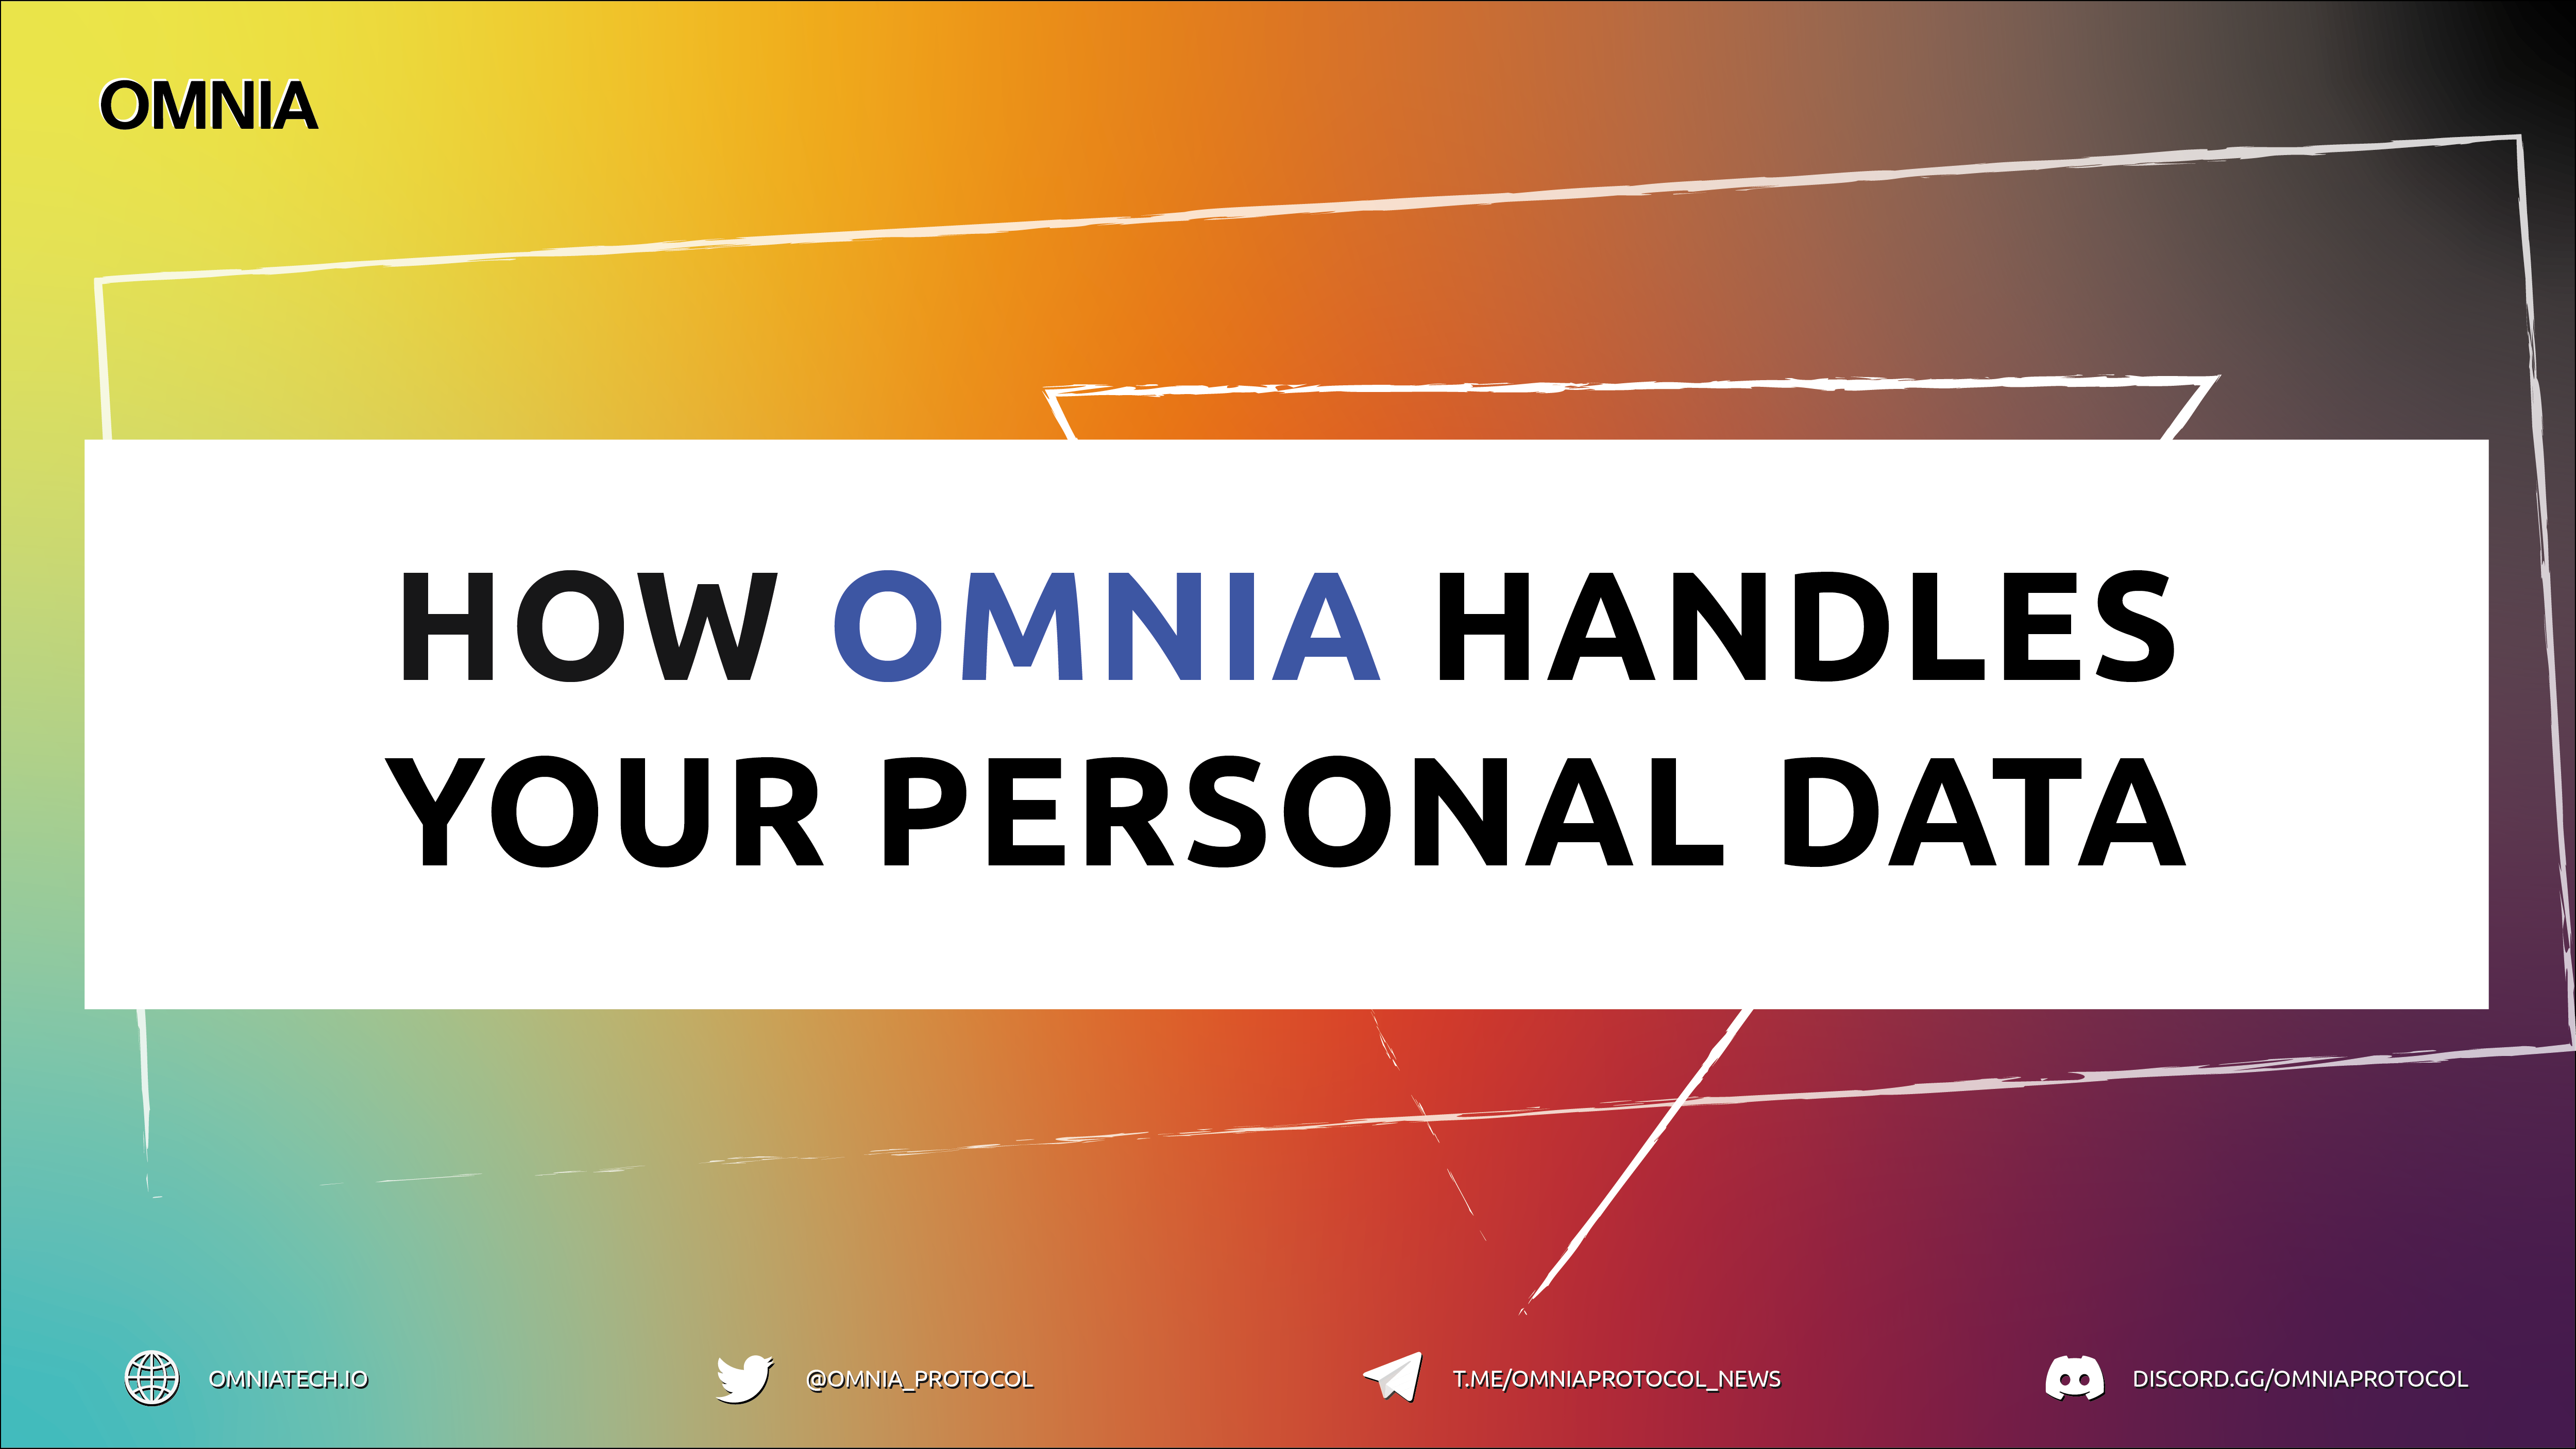 How OMNIA Handles Your Personal Data